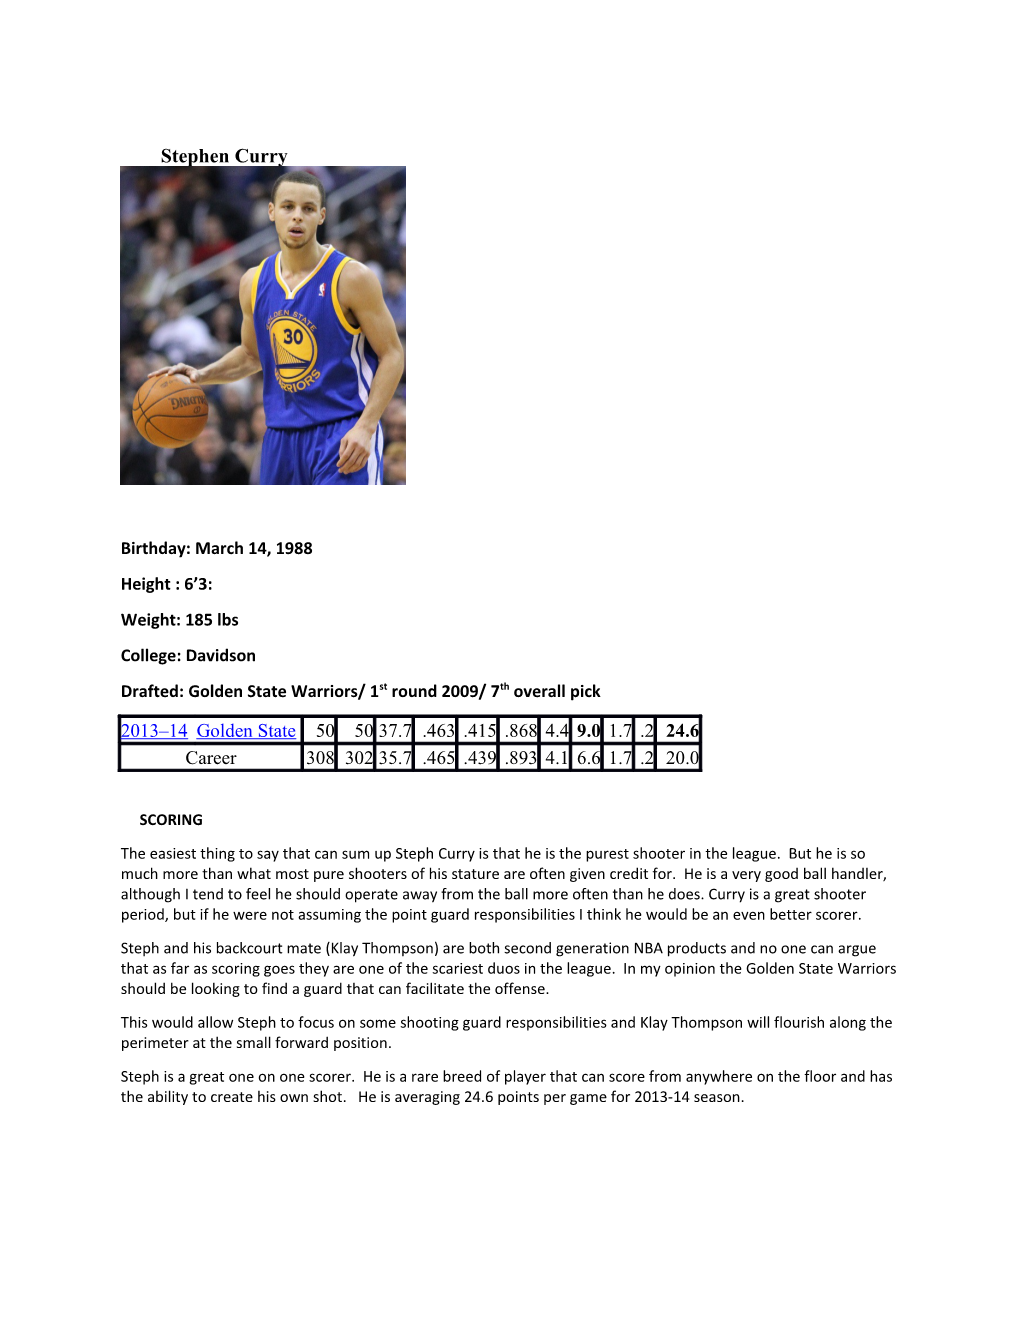 Drafted: Golden State Warriors/ 1St Round 2009/ 7Th Overall Pick